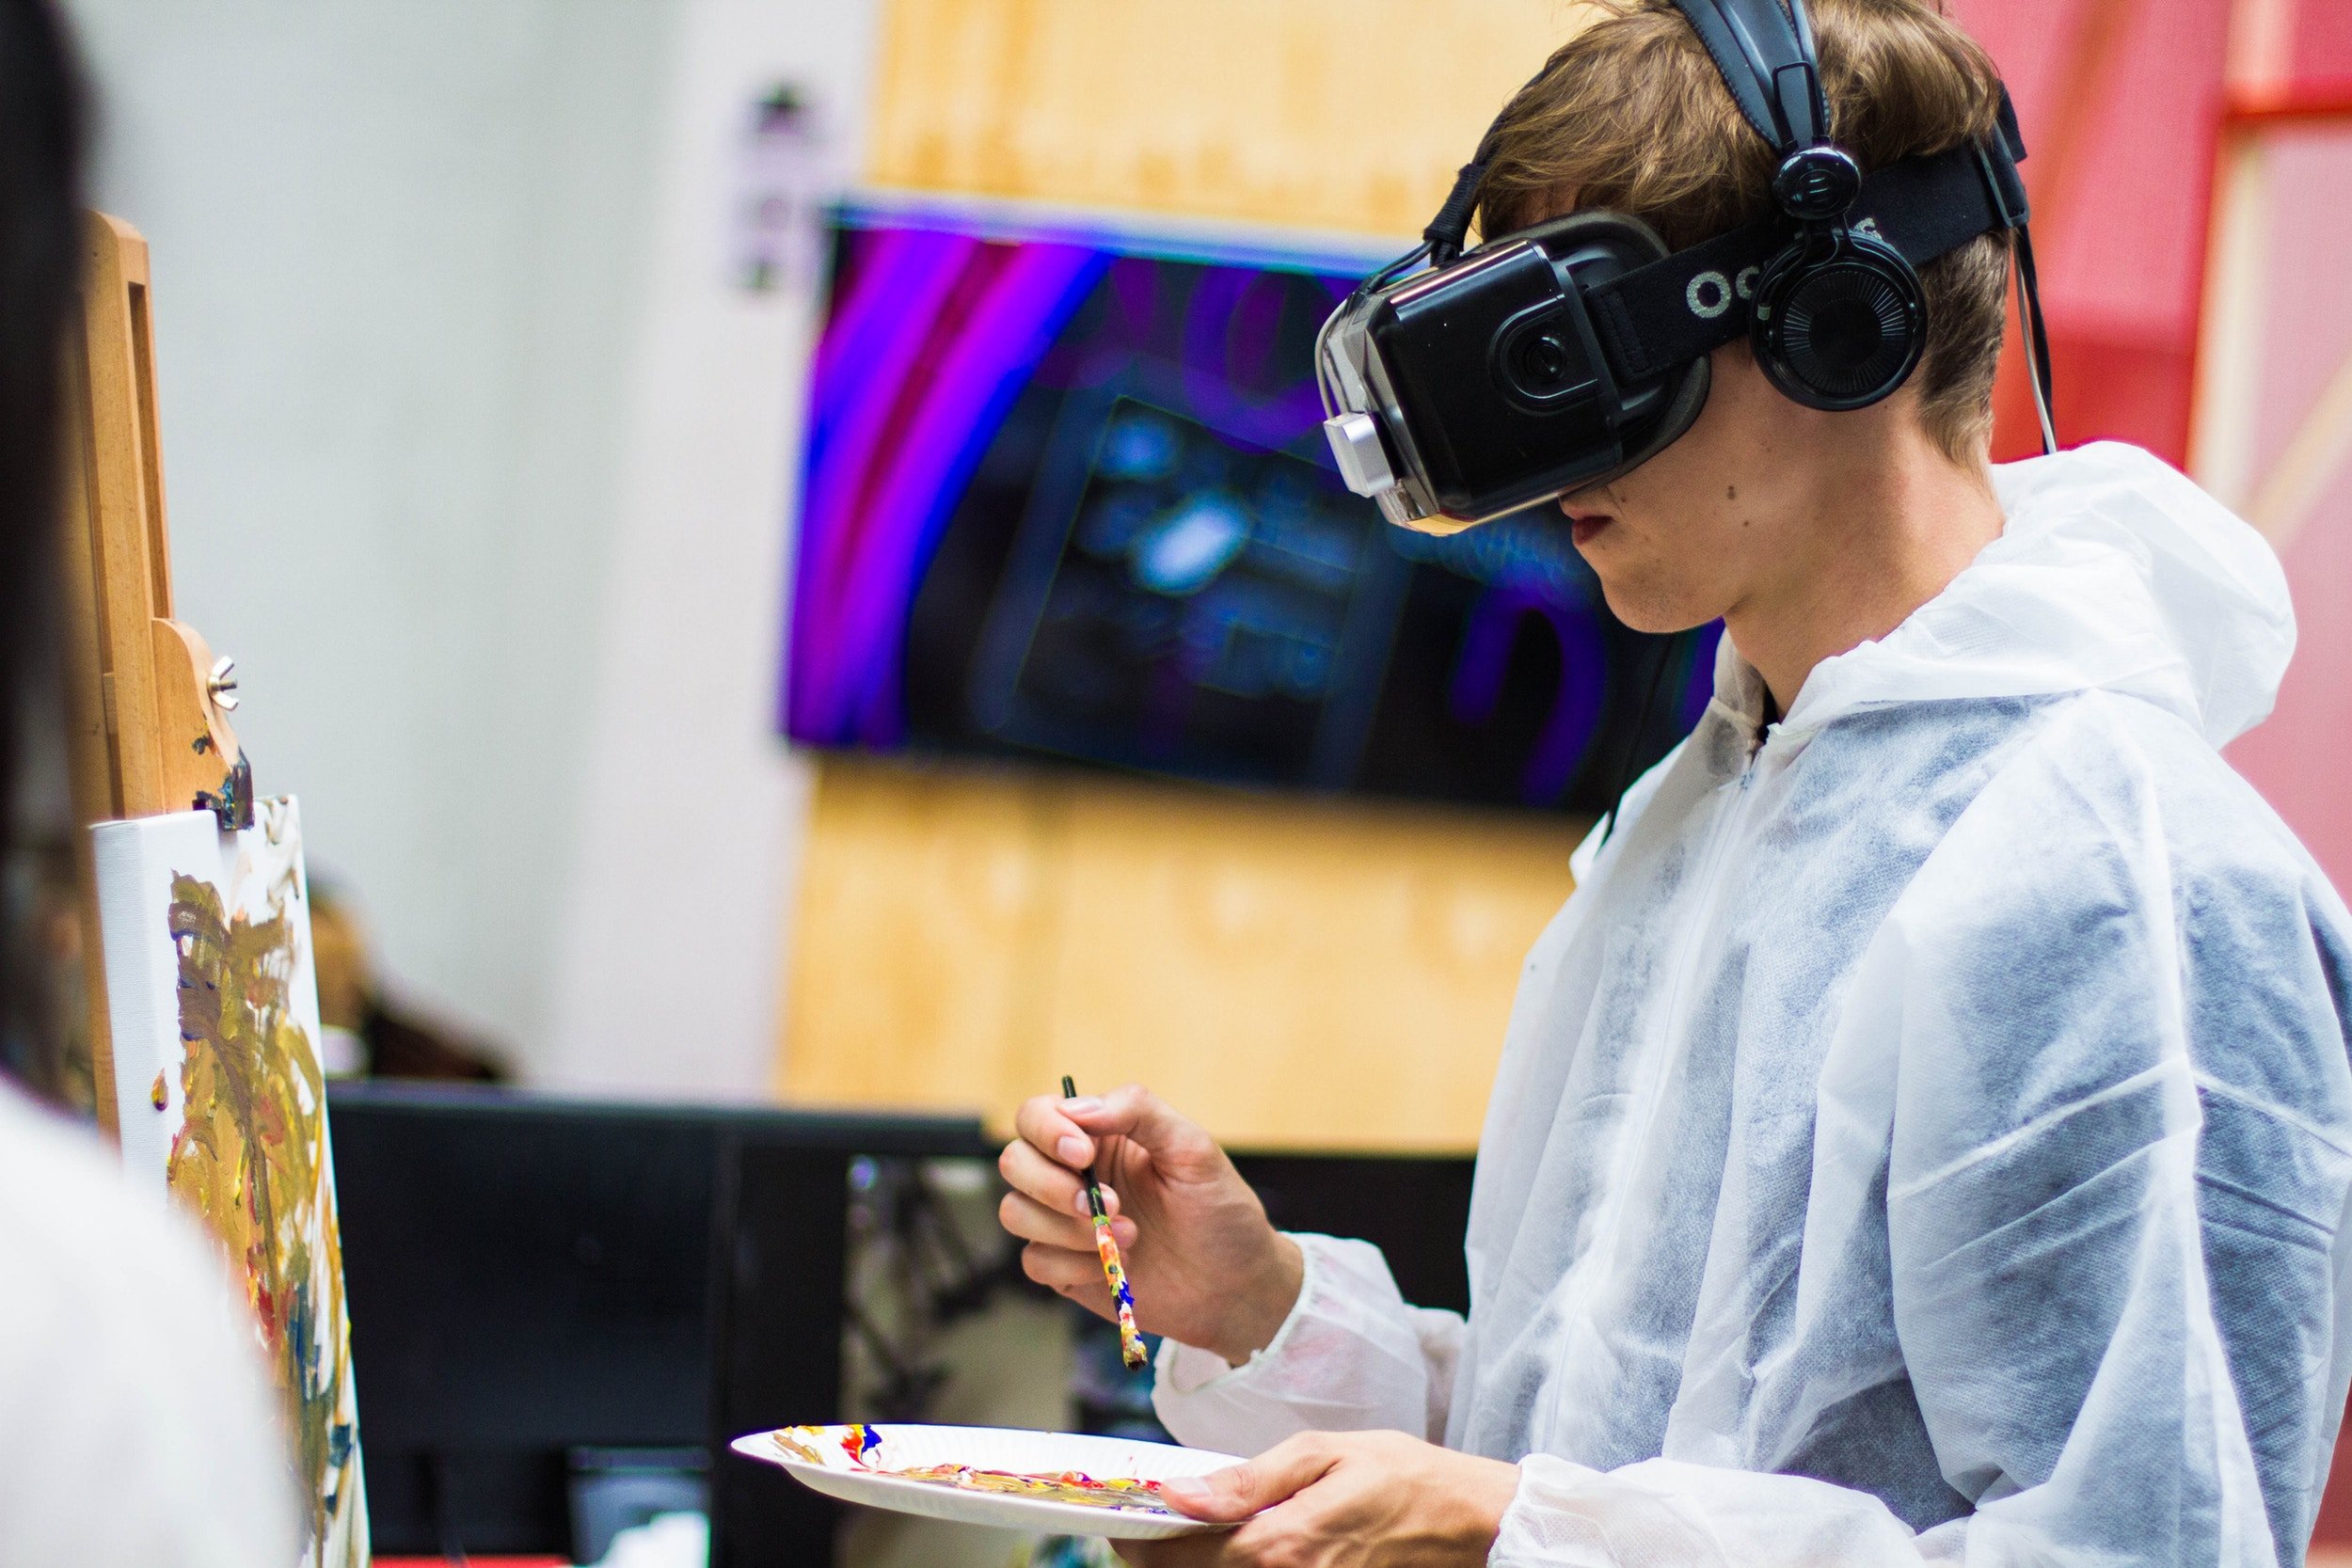 Virtual Reality (VR): The Future of Medical Training And Patient Care